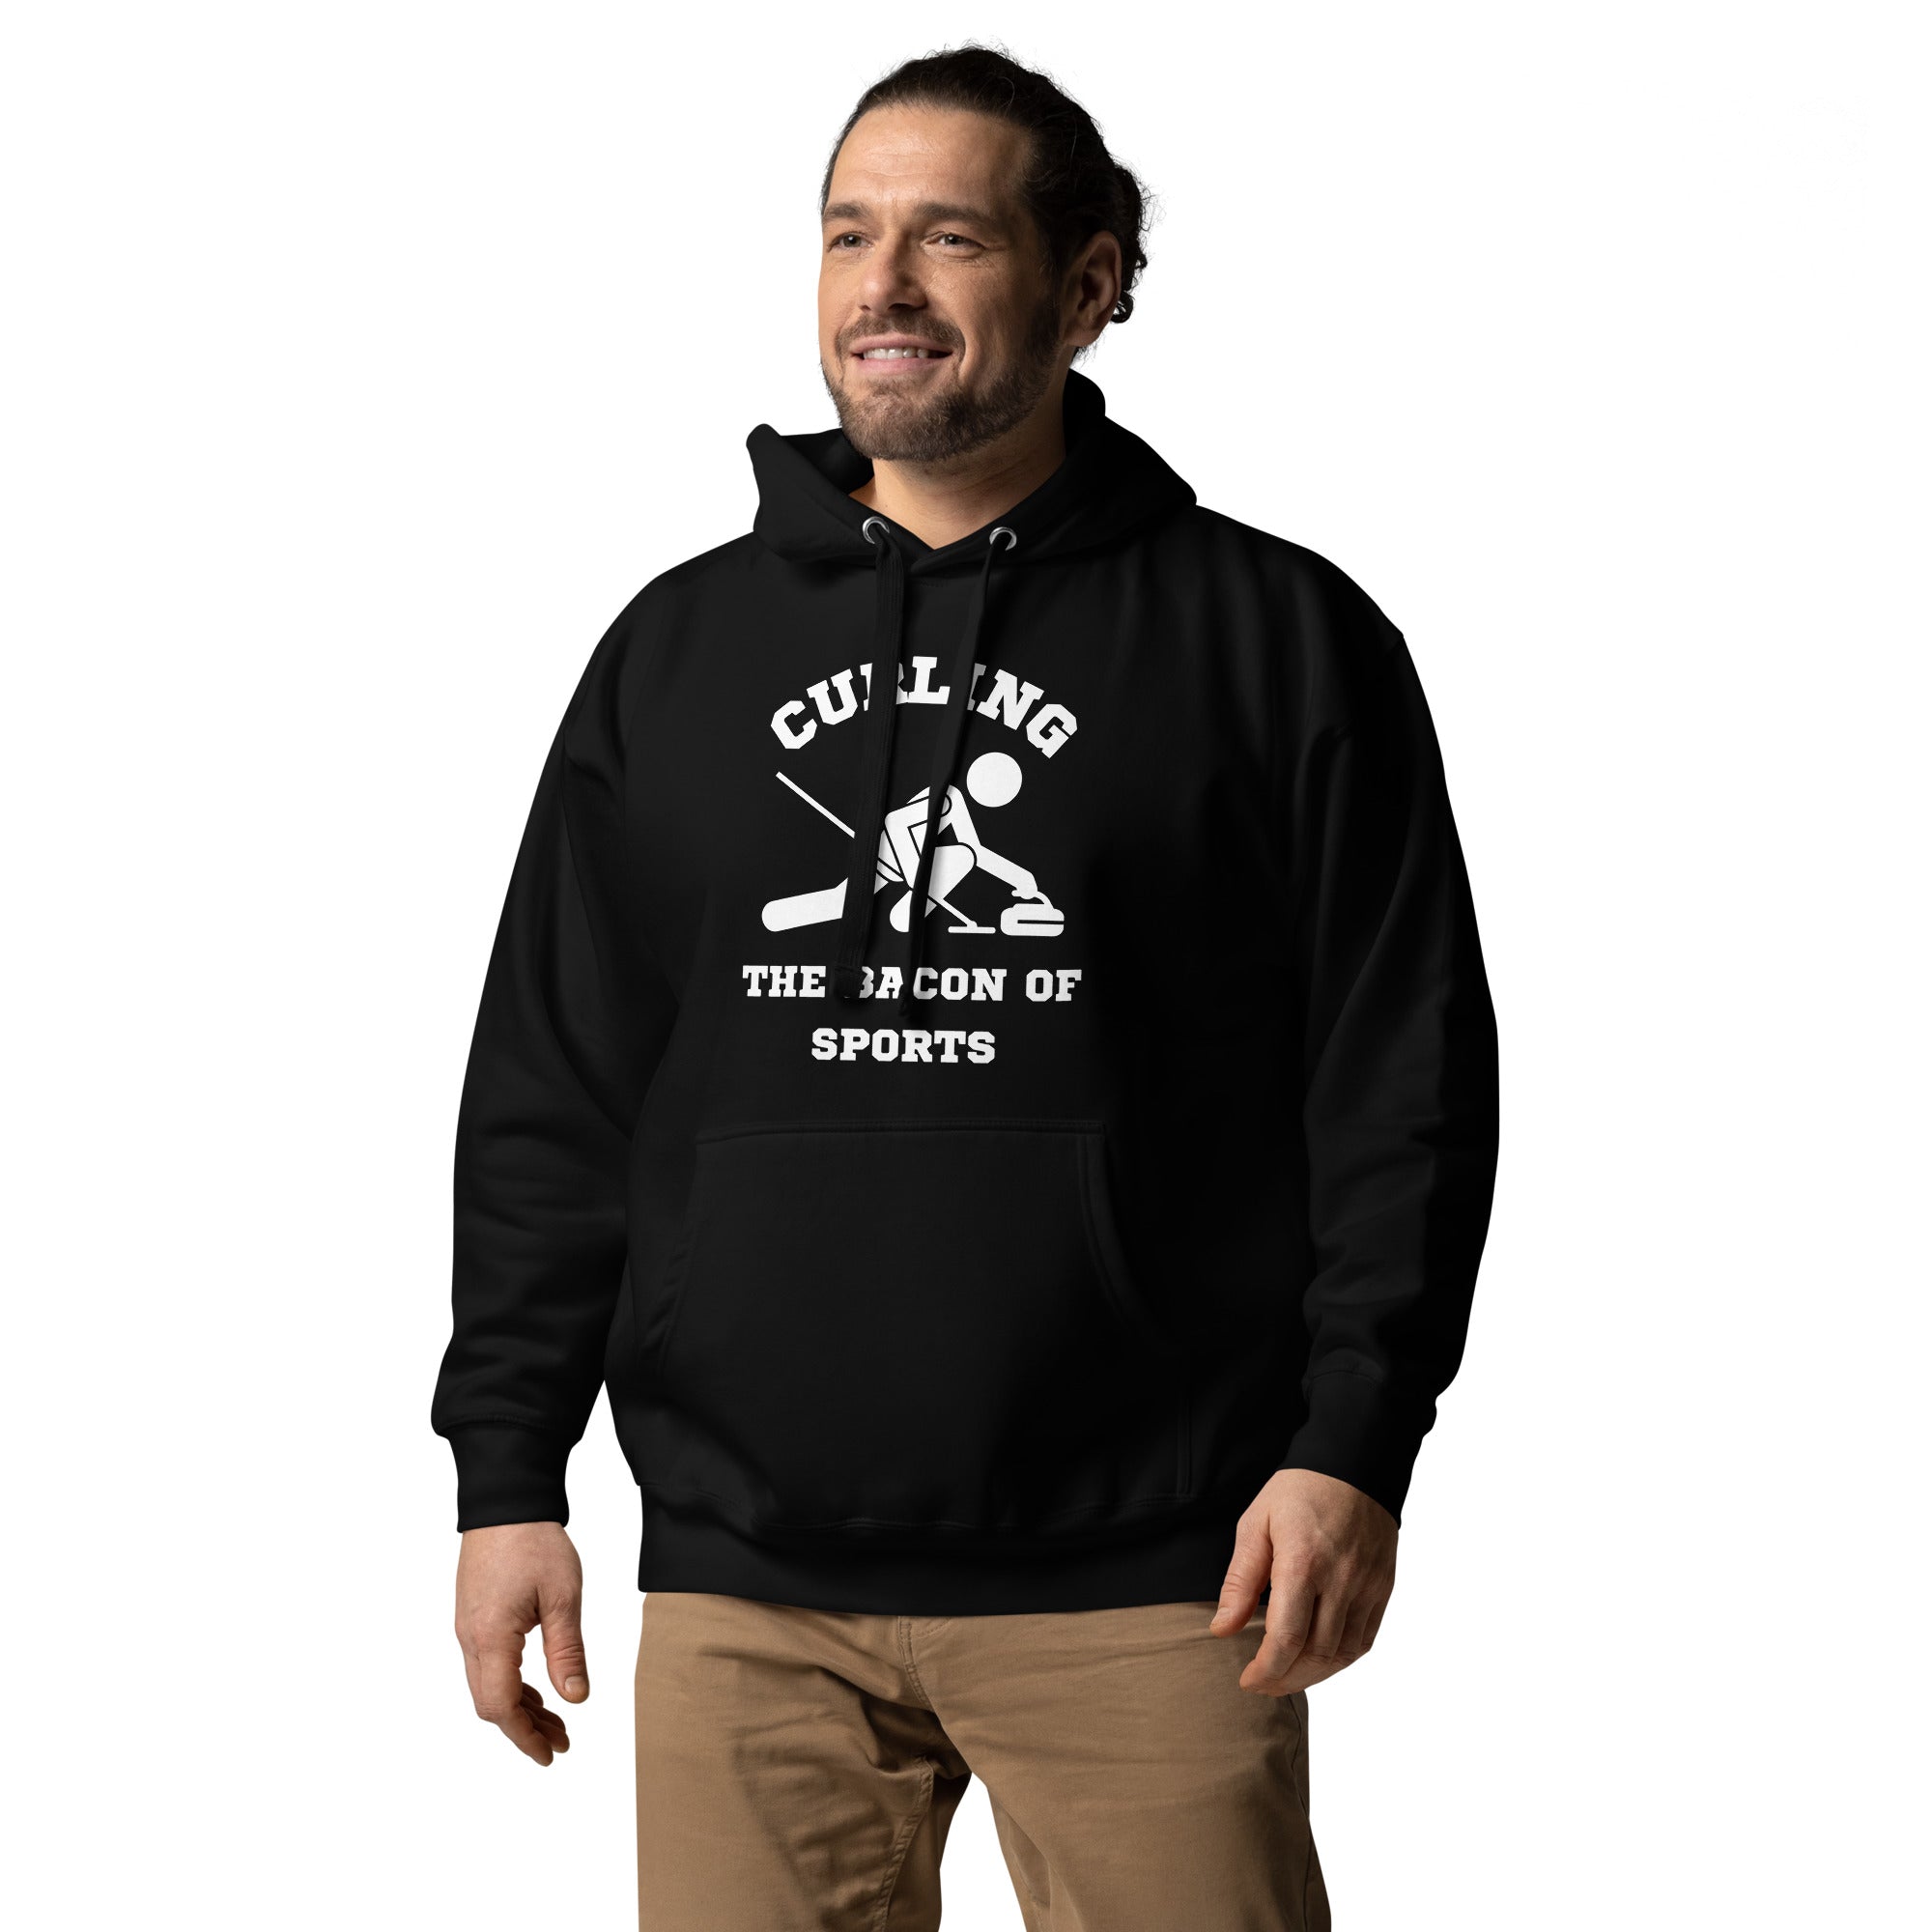 Curling The Bacon Of Sports Men's Heavy Hoodie